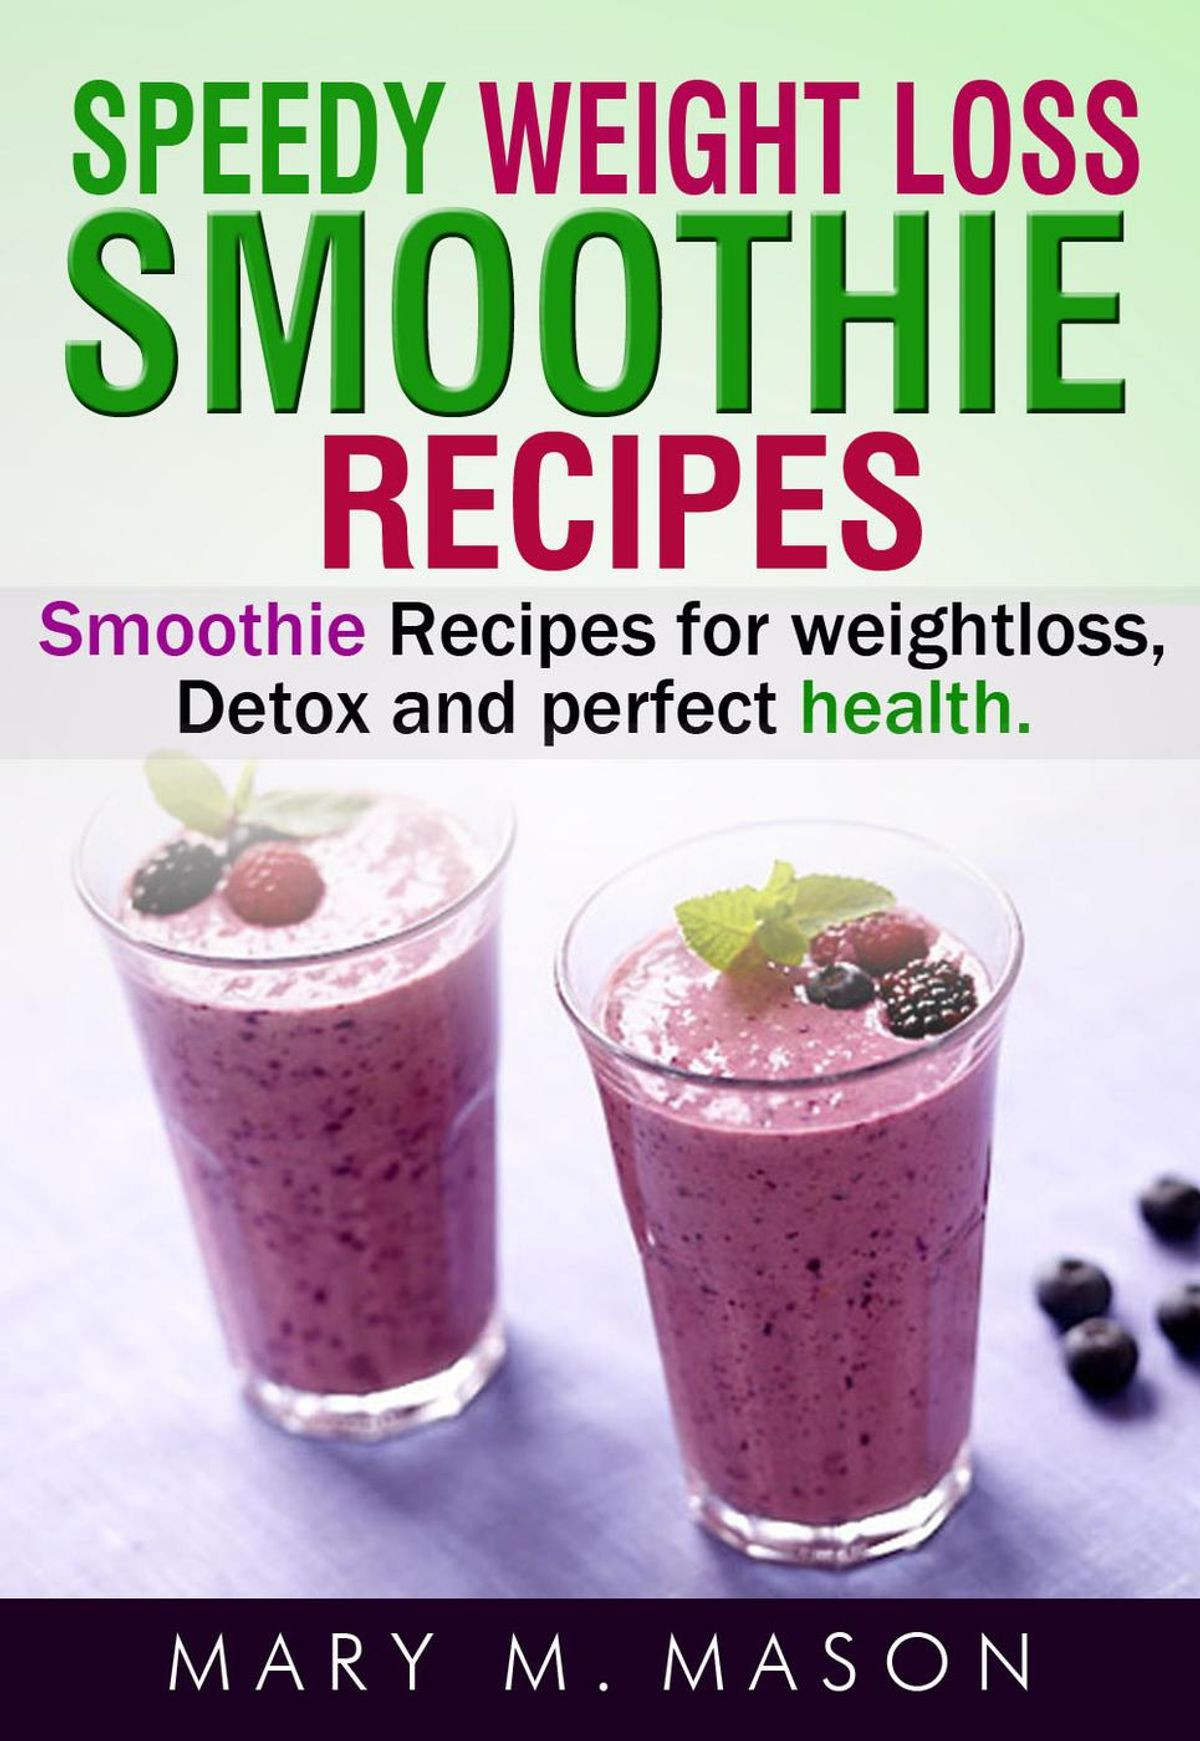 Weight Loss Smoothie Recipes Free
 Speedy Weight Loss Smoothie Recipes Smoothie Recipes for